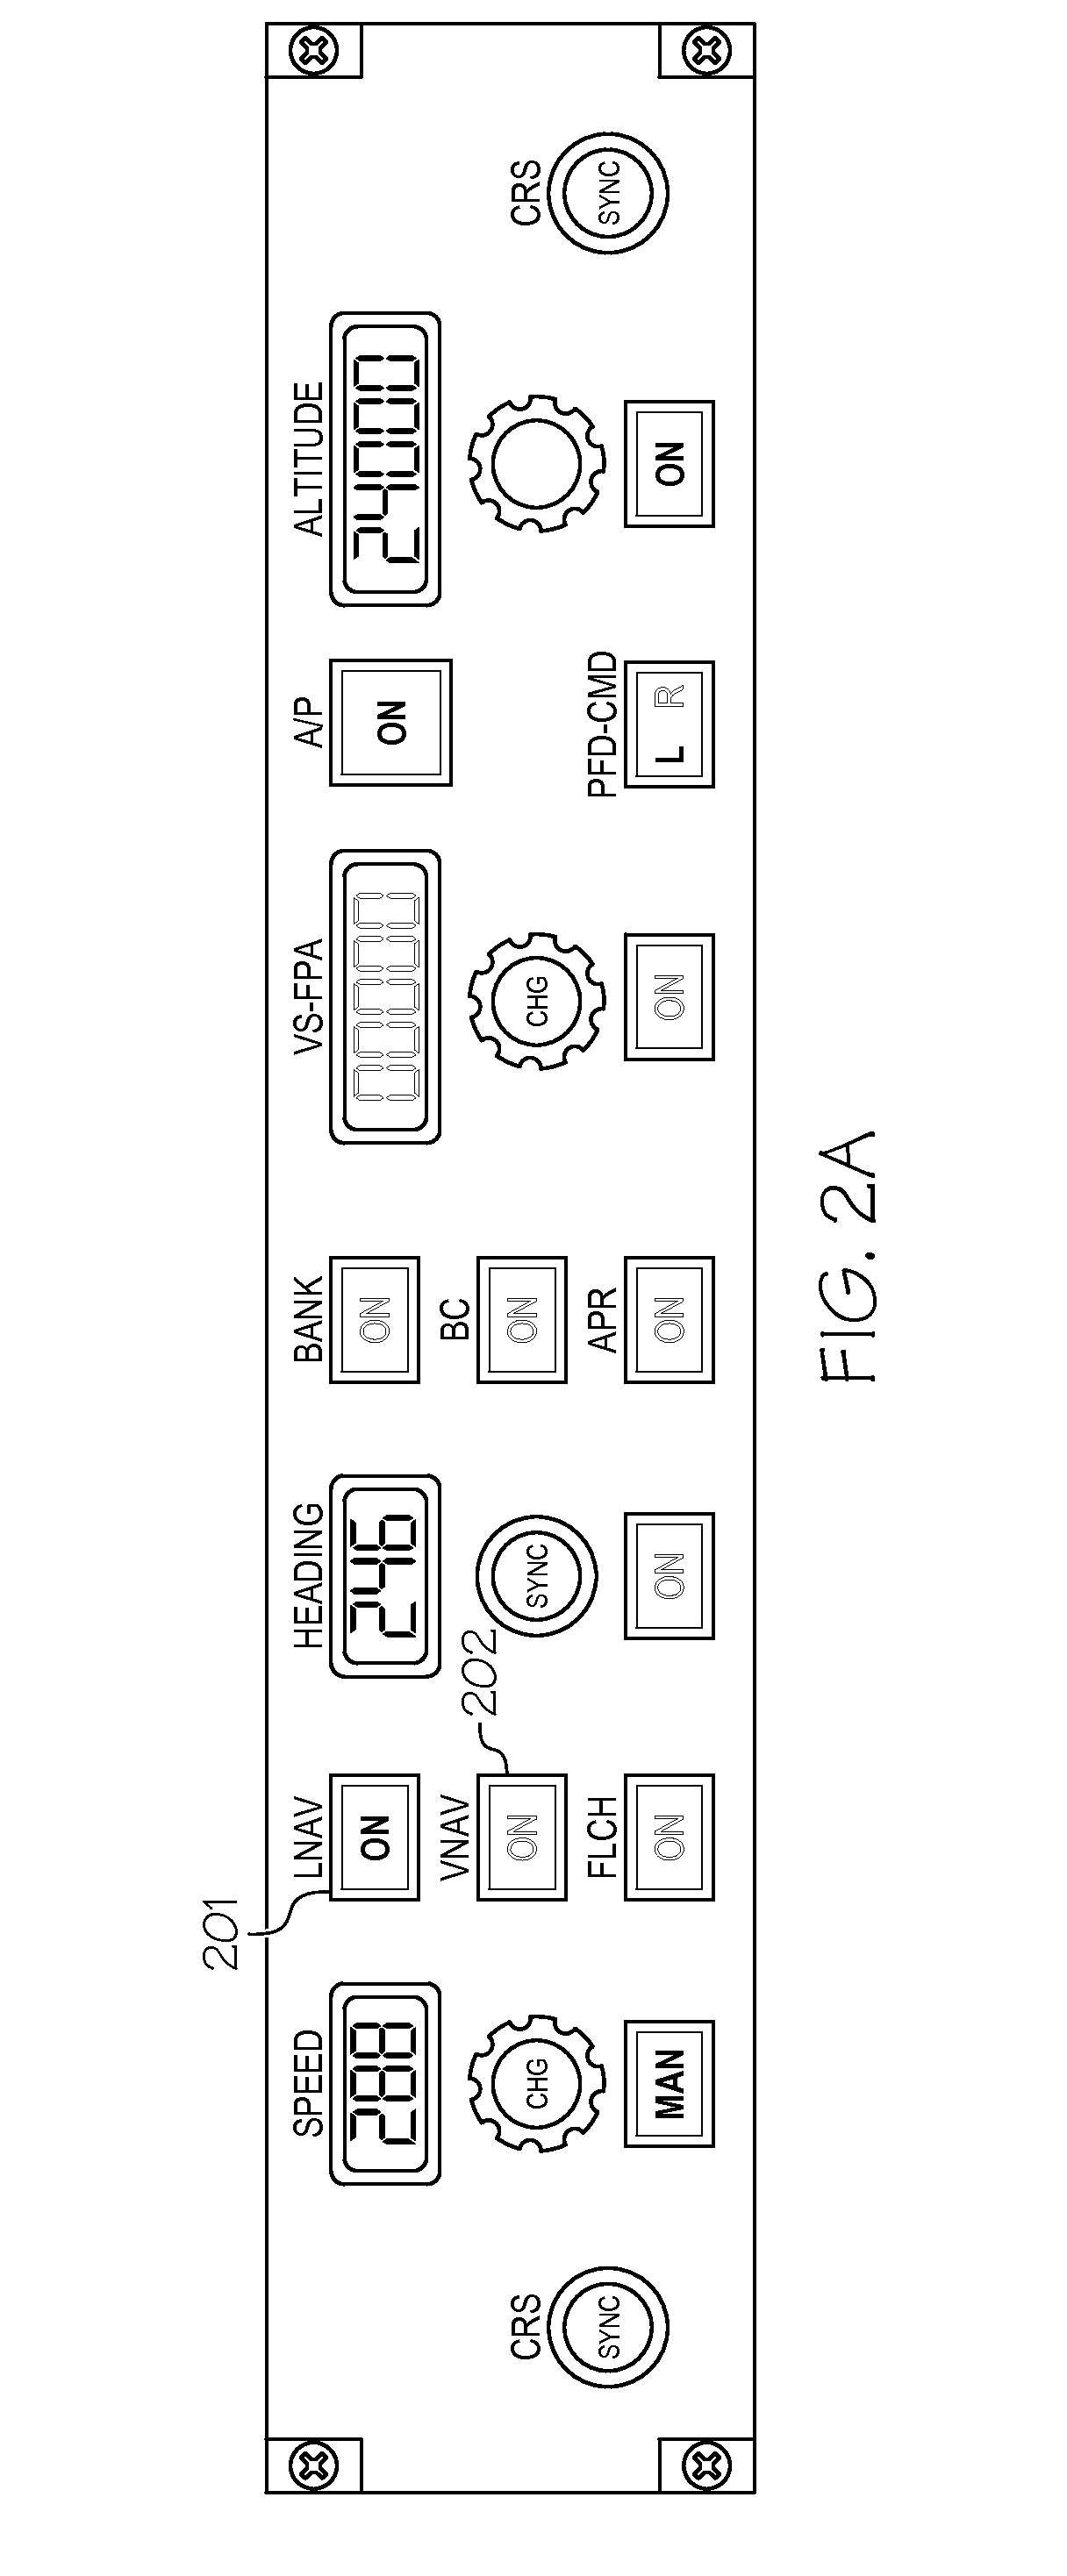 Display systems and methods for providing displays having an integrated autopilot functionality